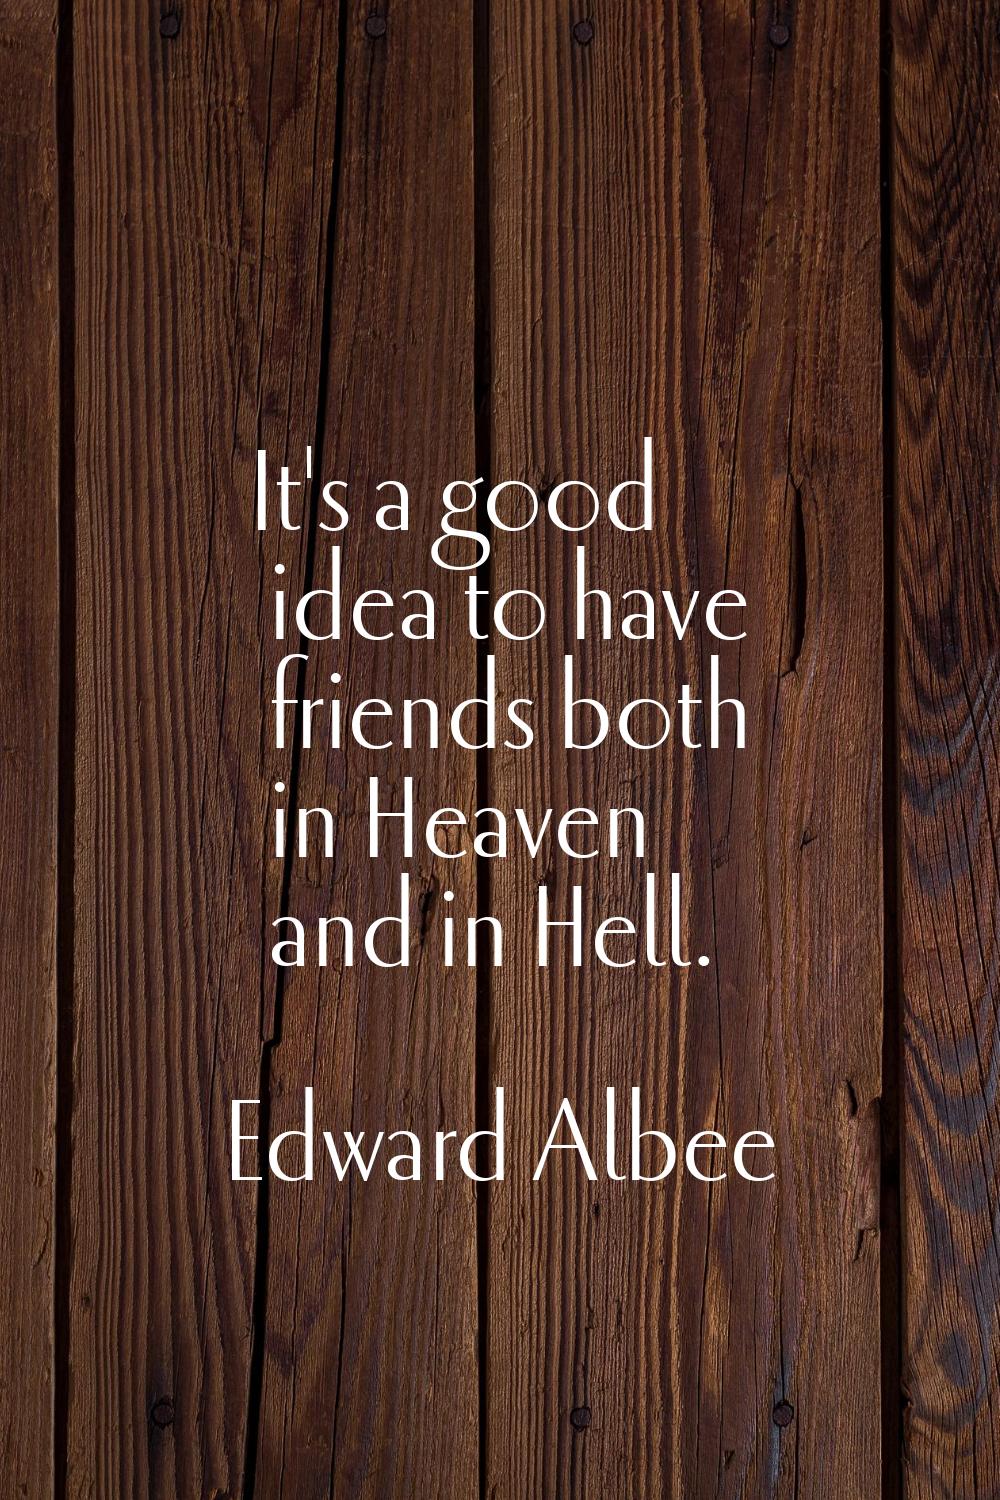 It's a good idea to have friends both in Heaven and in Hell.